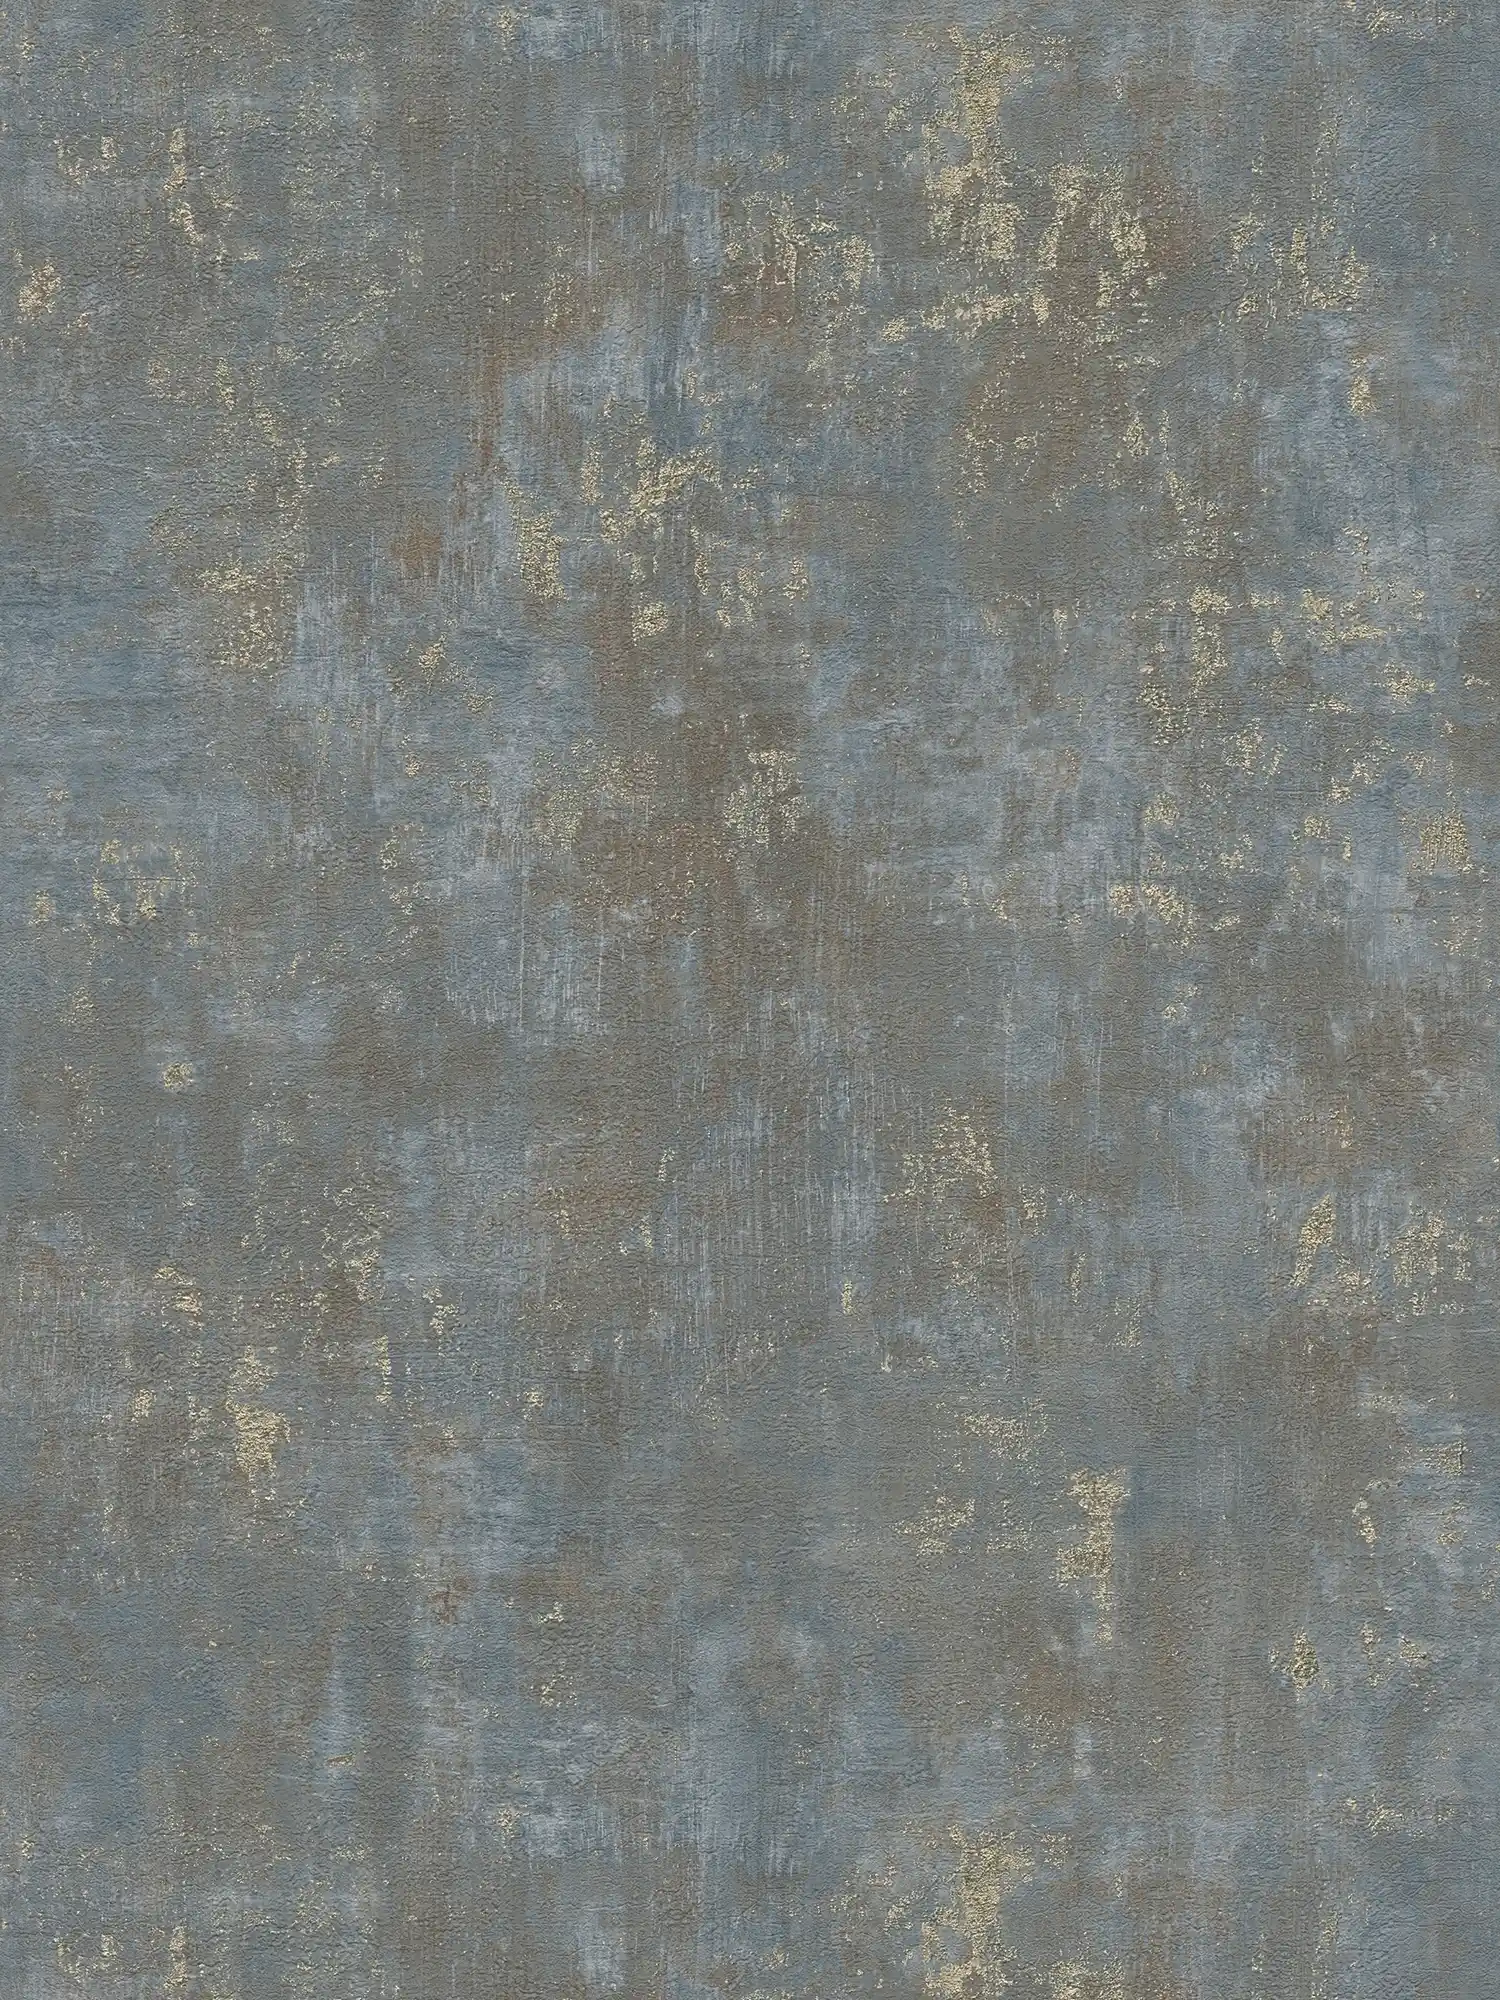 Rust-look wallpaper with metallic accents - brown, blue, gold
